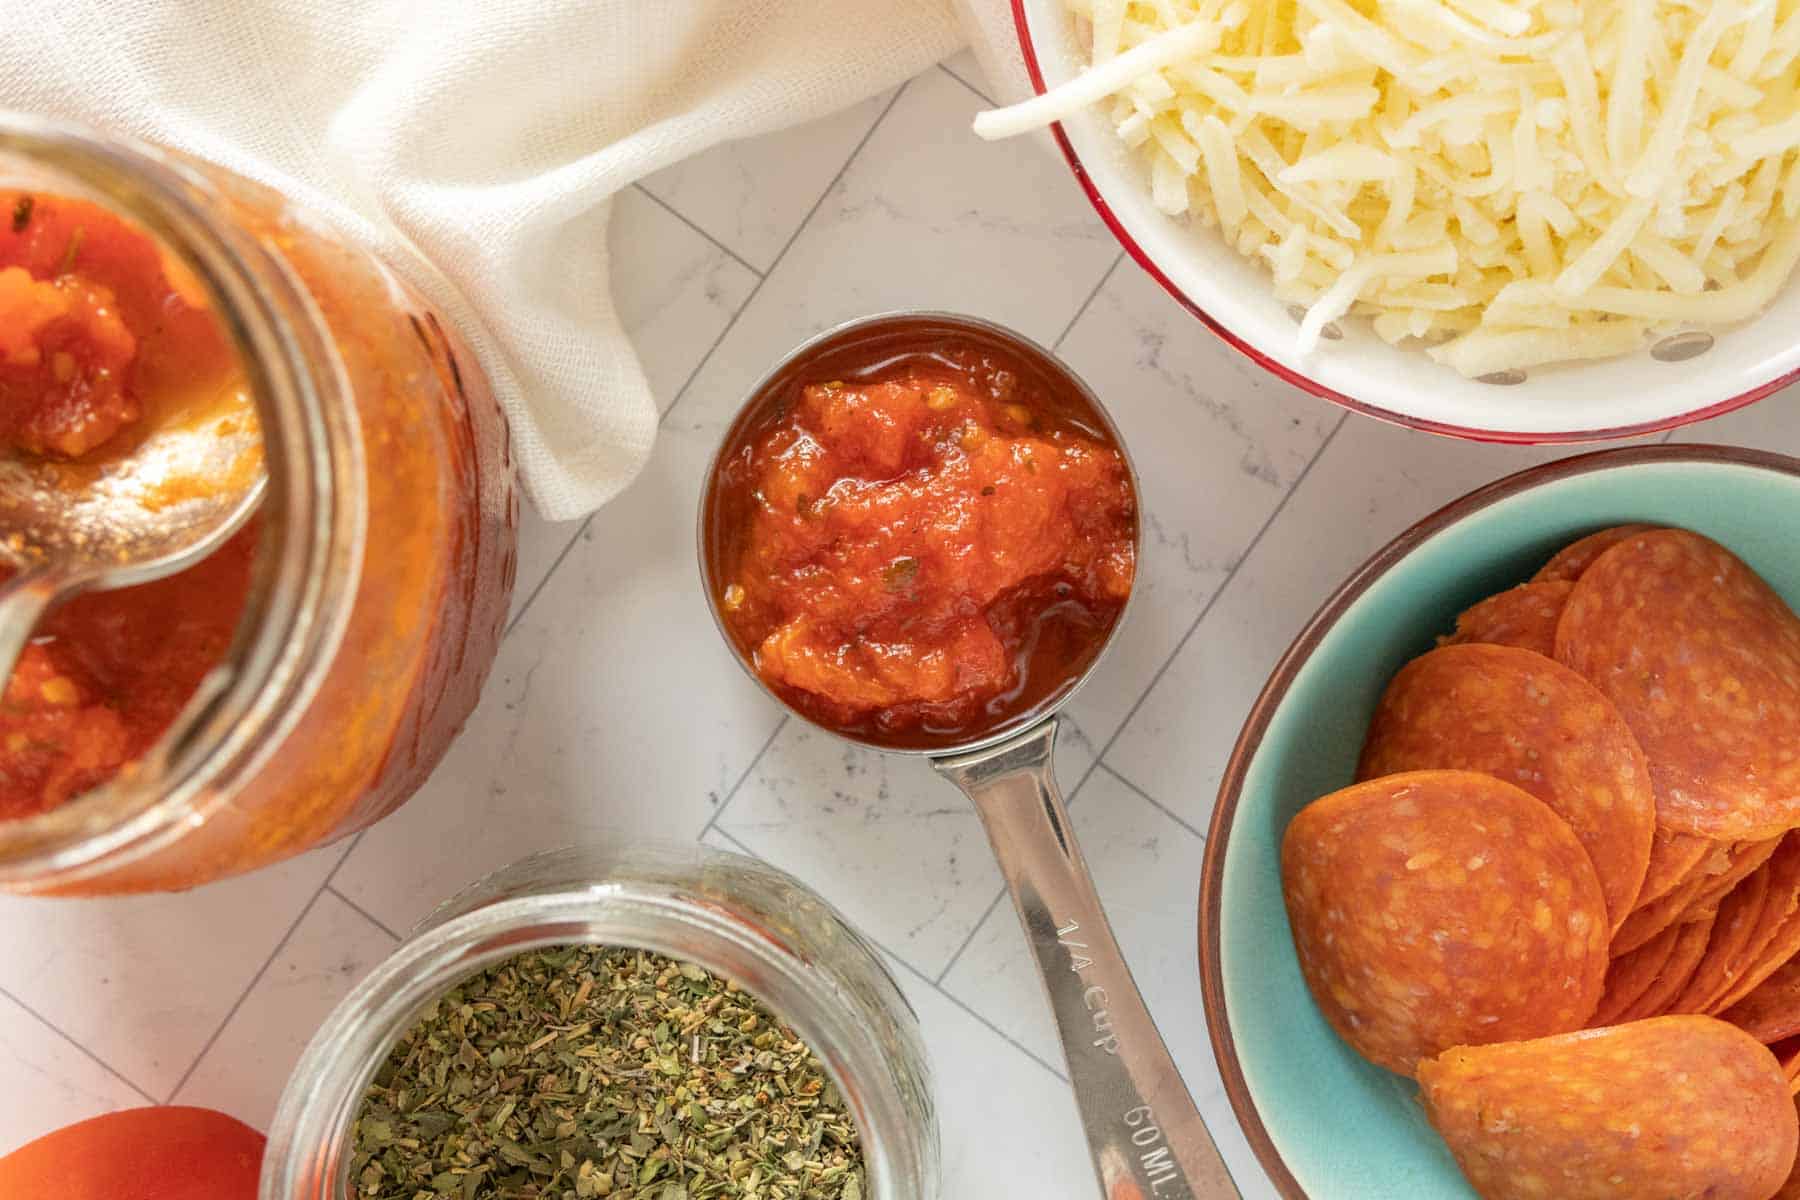 Jars of tomato sauce, pepperoni, cheese and other ingredients on a table.